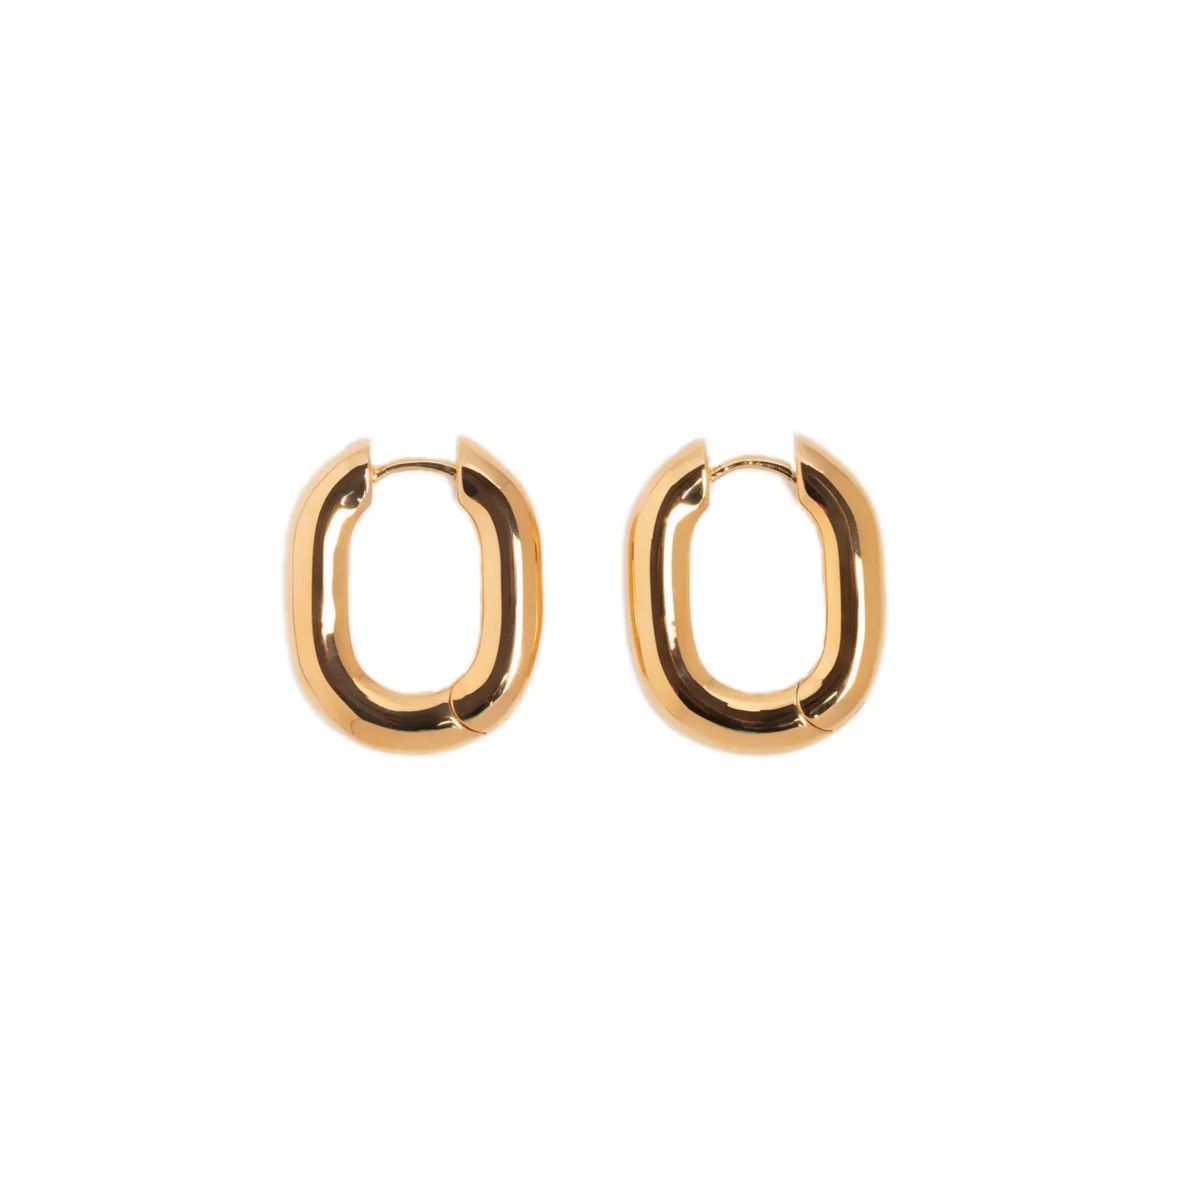 Icon Oval Hoops - Gold Petite | Erin Fader Jewelry Design